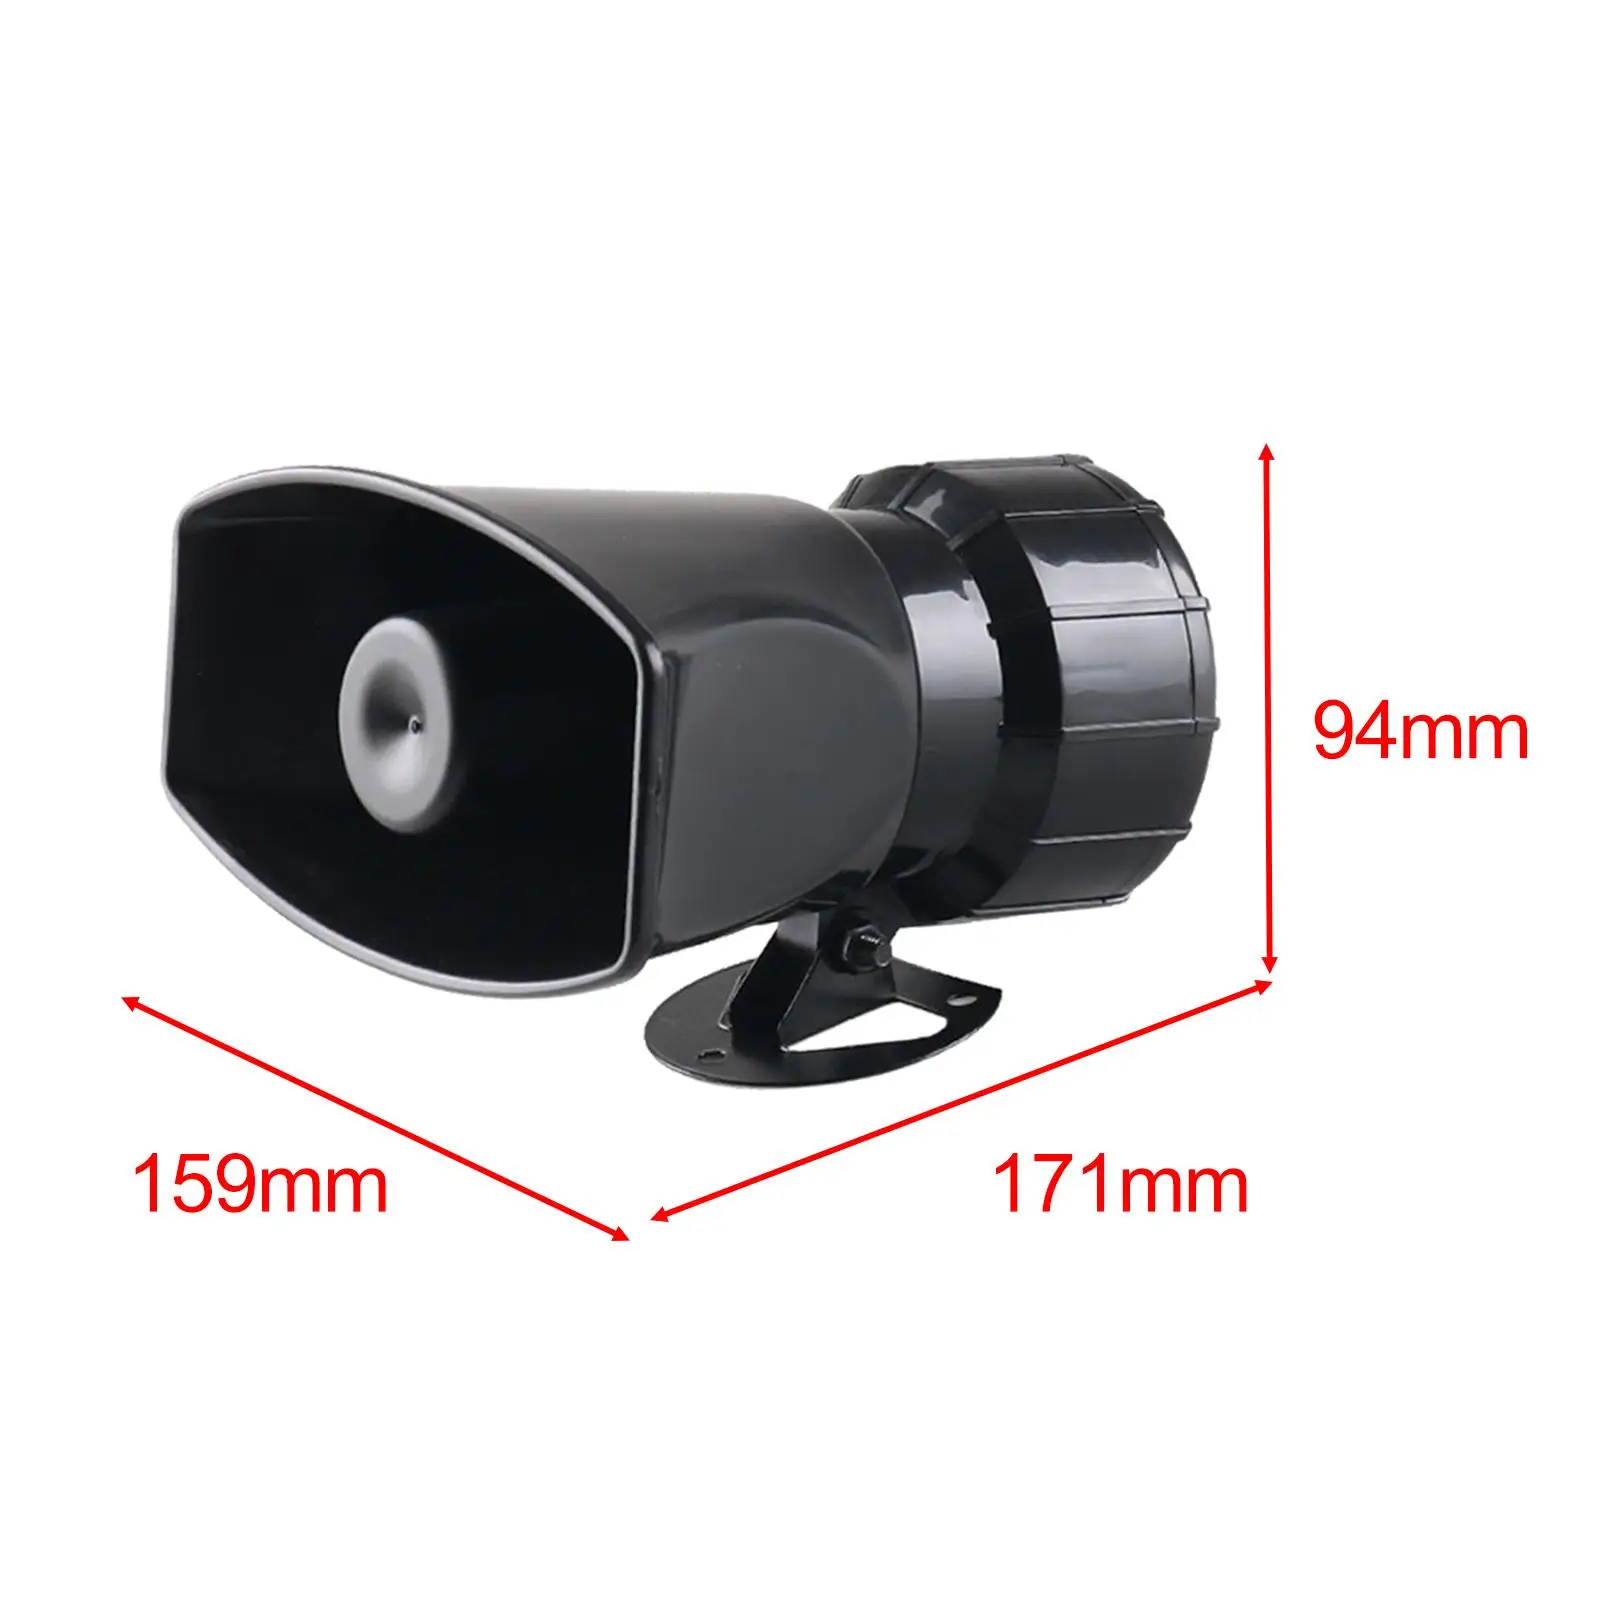 Generic Car Alarm Speaker 7 Tone Sound 12V Wireless with Mic System Electric Horn for Motorcycle Vehicle Boat Lorry Truck